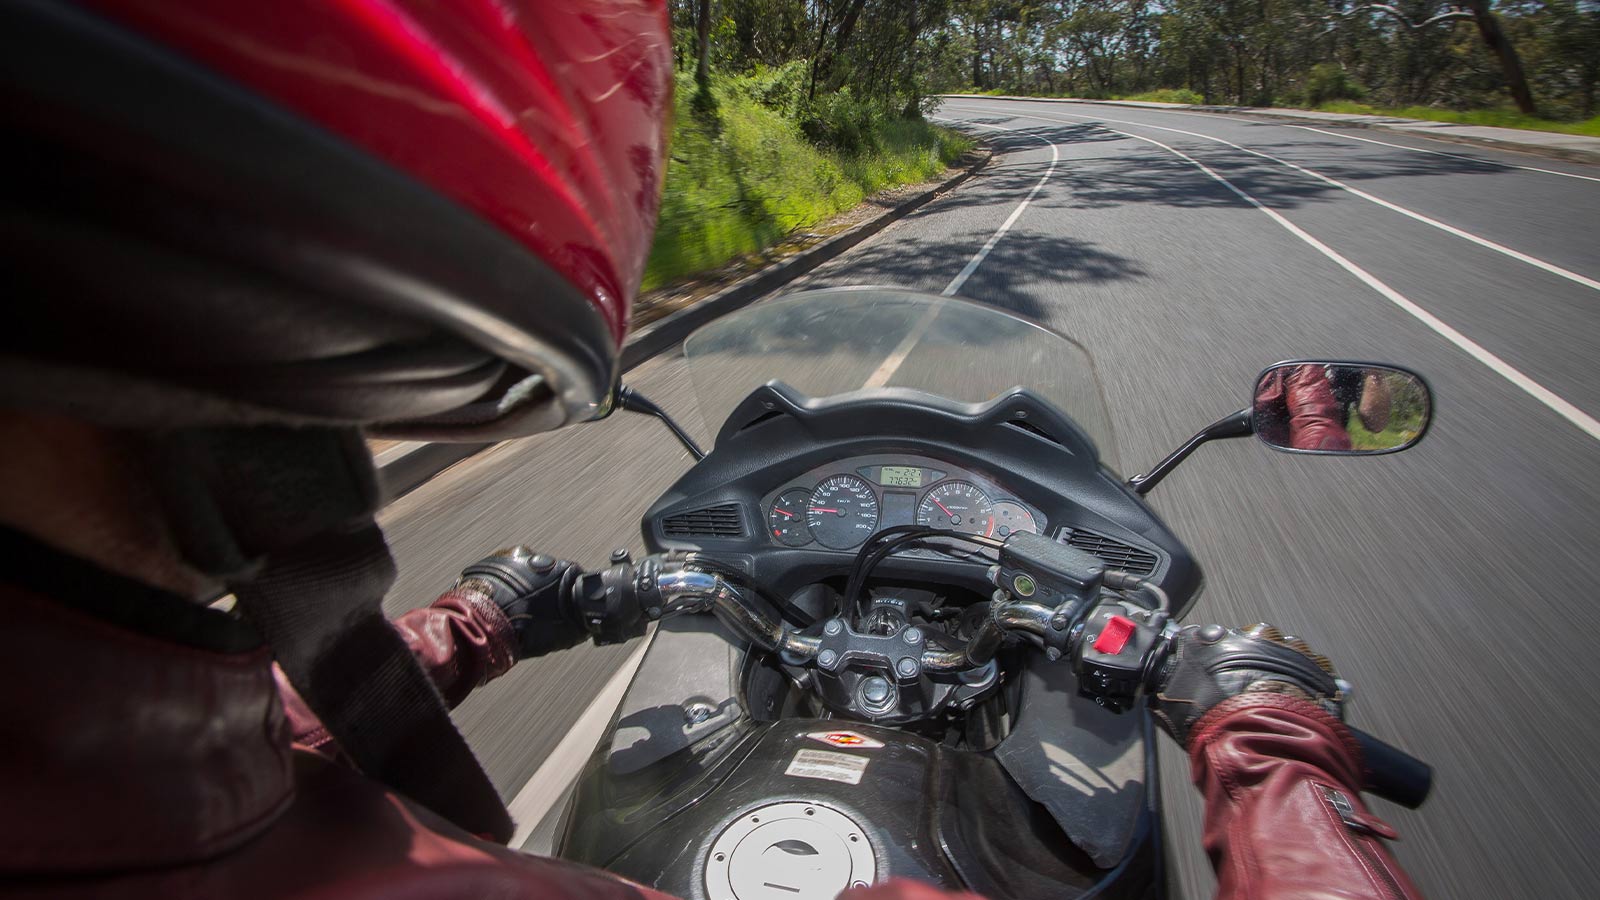 Close up of a motorcyclist riding while checking the speedometer.